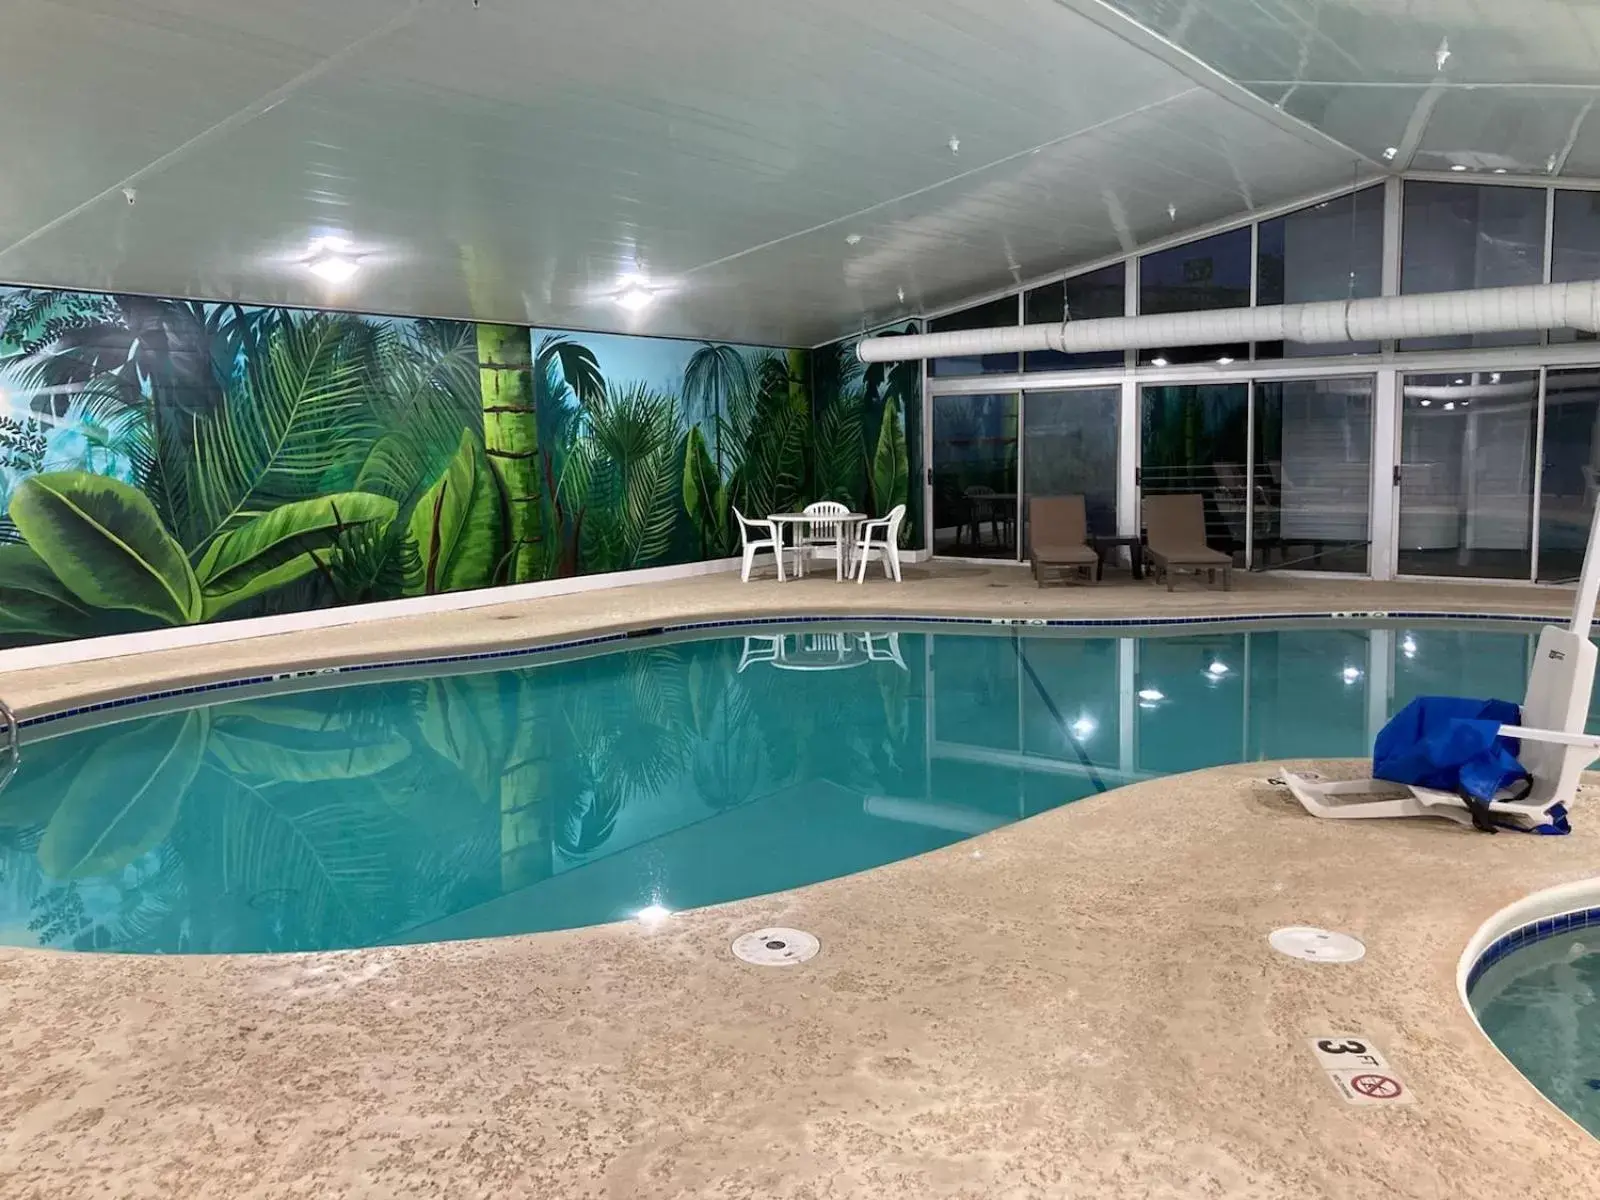 Swimming Pool in Quality Inn & Suites Bellville - Mansfield